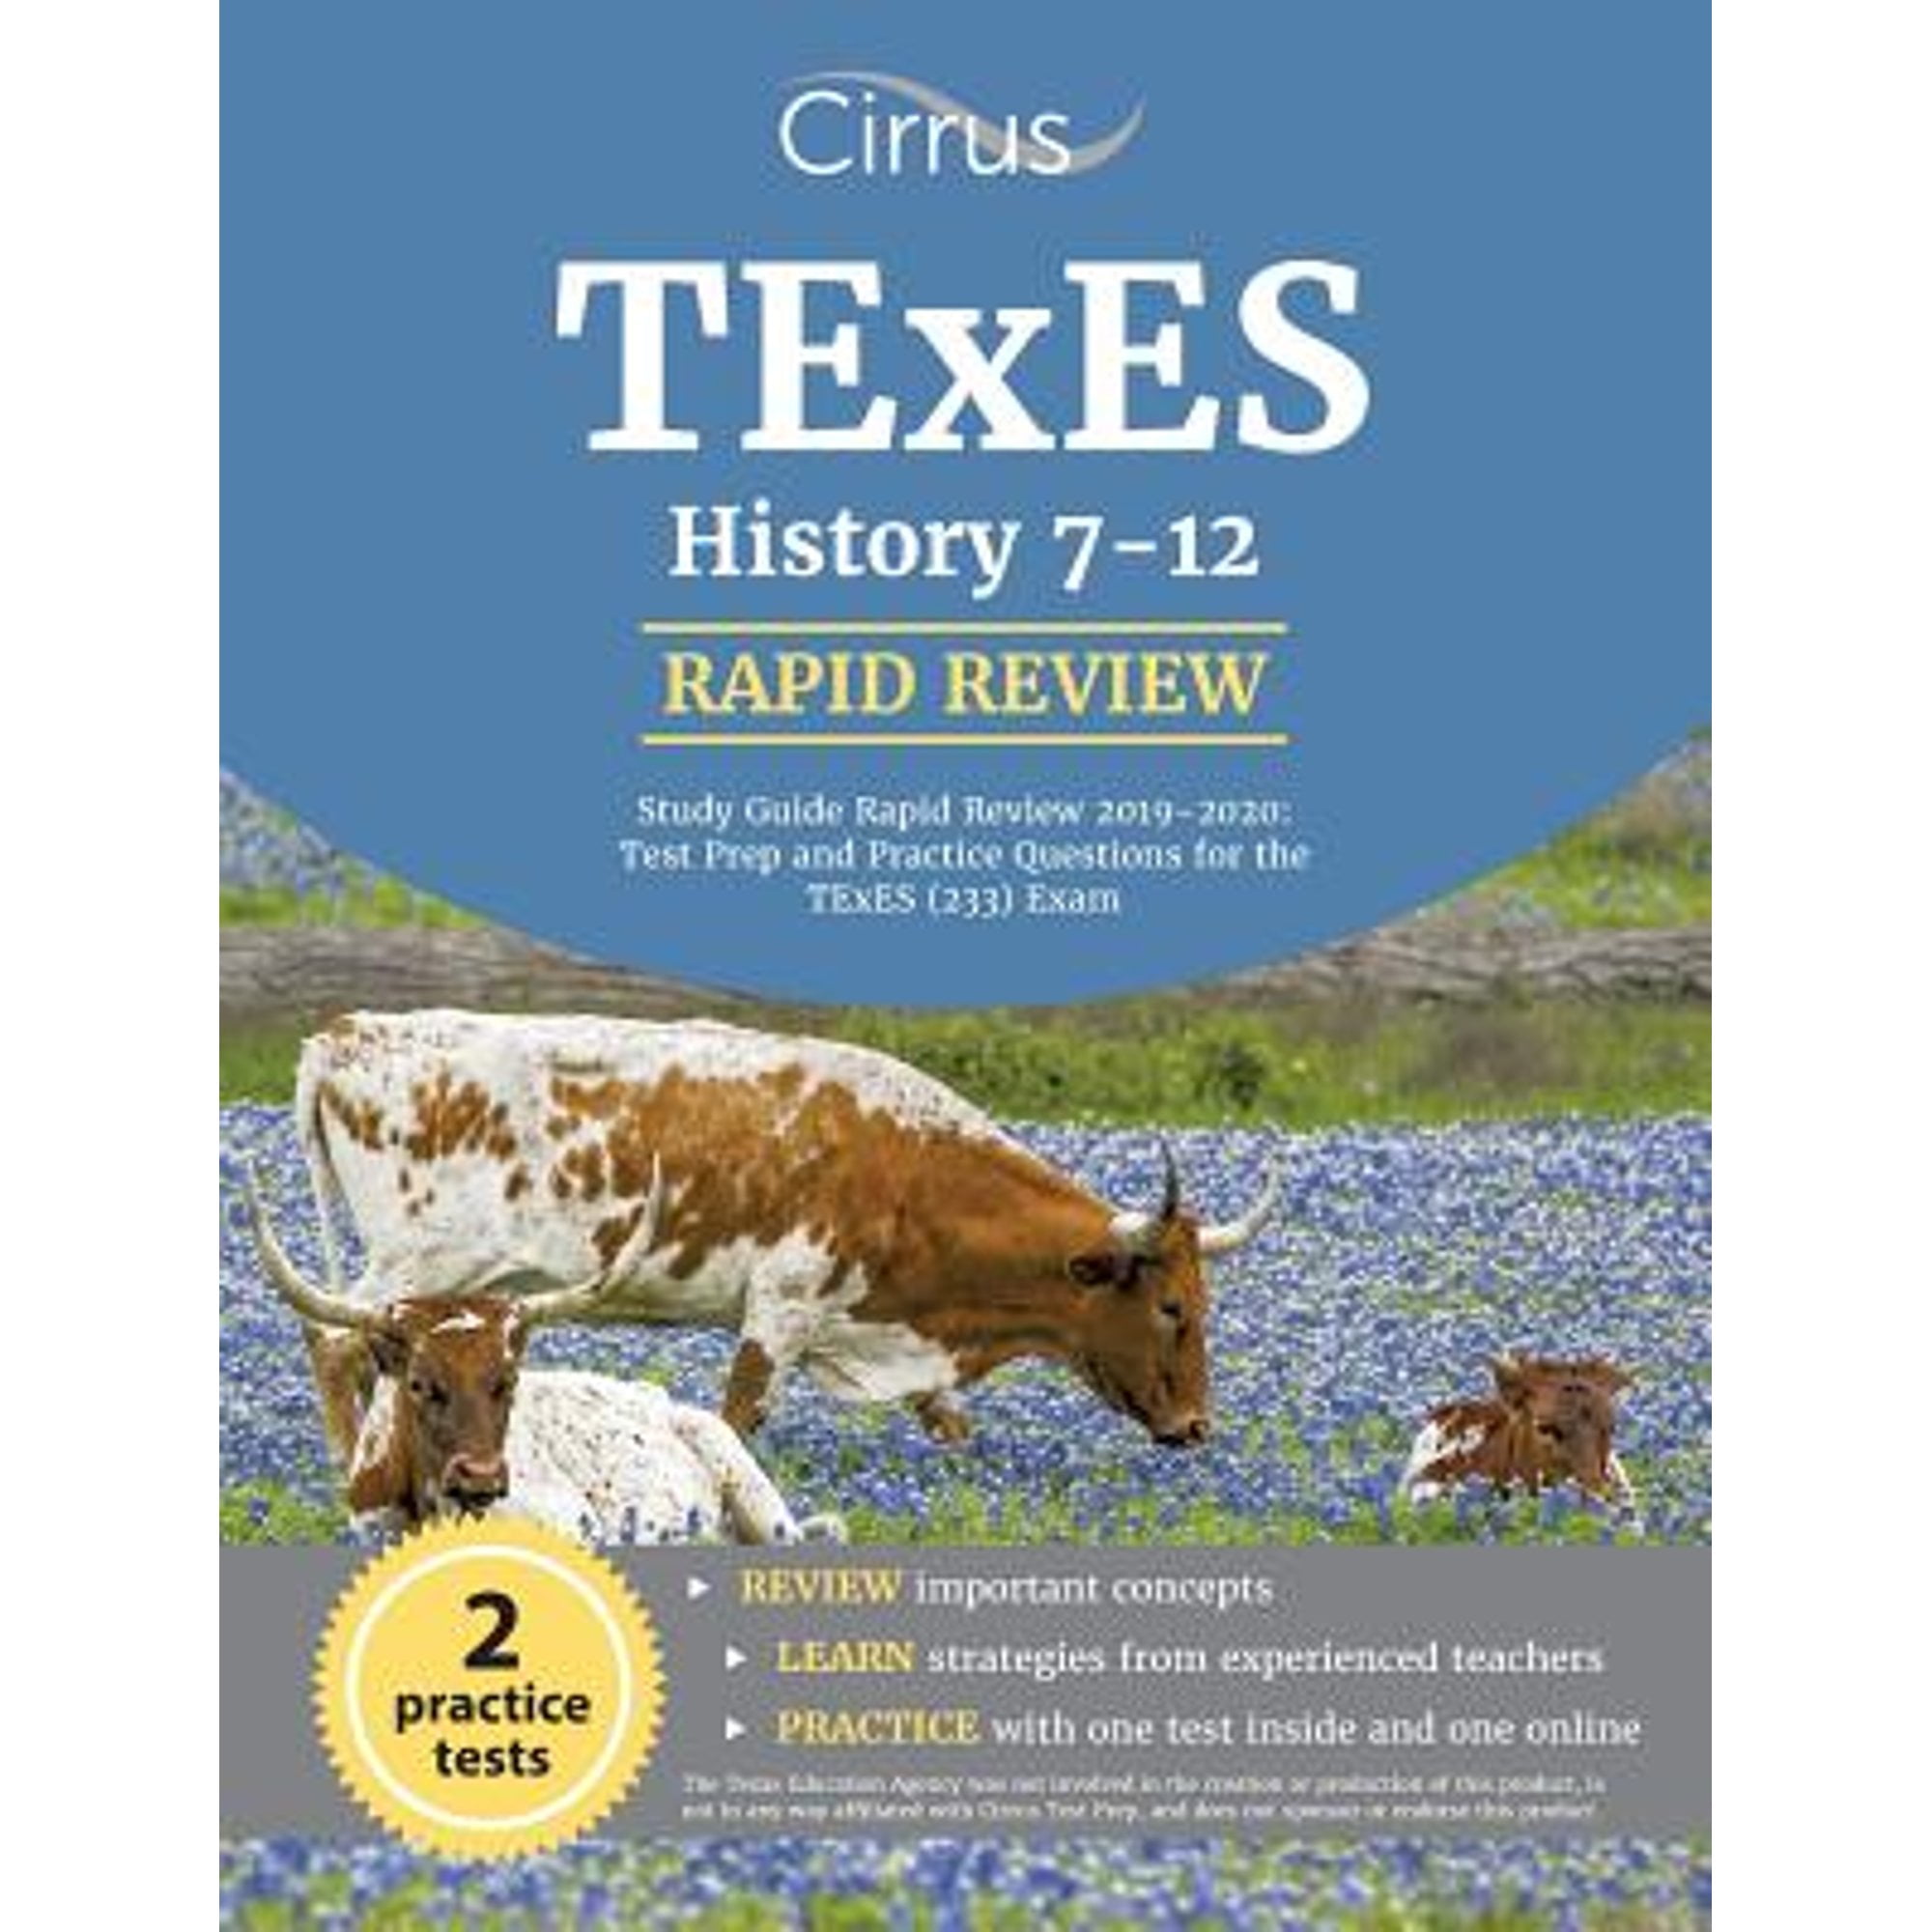 Pre-Owned TExES History 7-12 Study Guide Rapid Review 2019-2020: Test Prep and Practice Questions (Paperback 9781635304831) by Cirrus Teacher Certification Exam Team